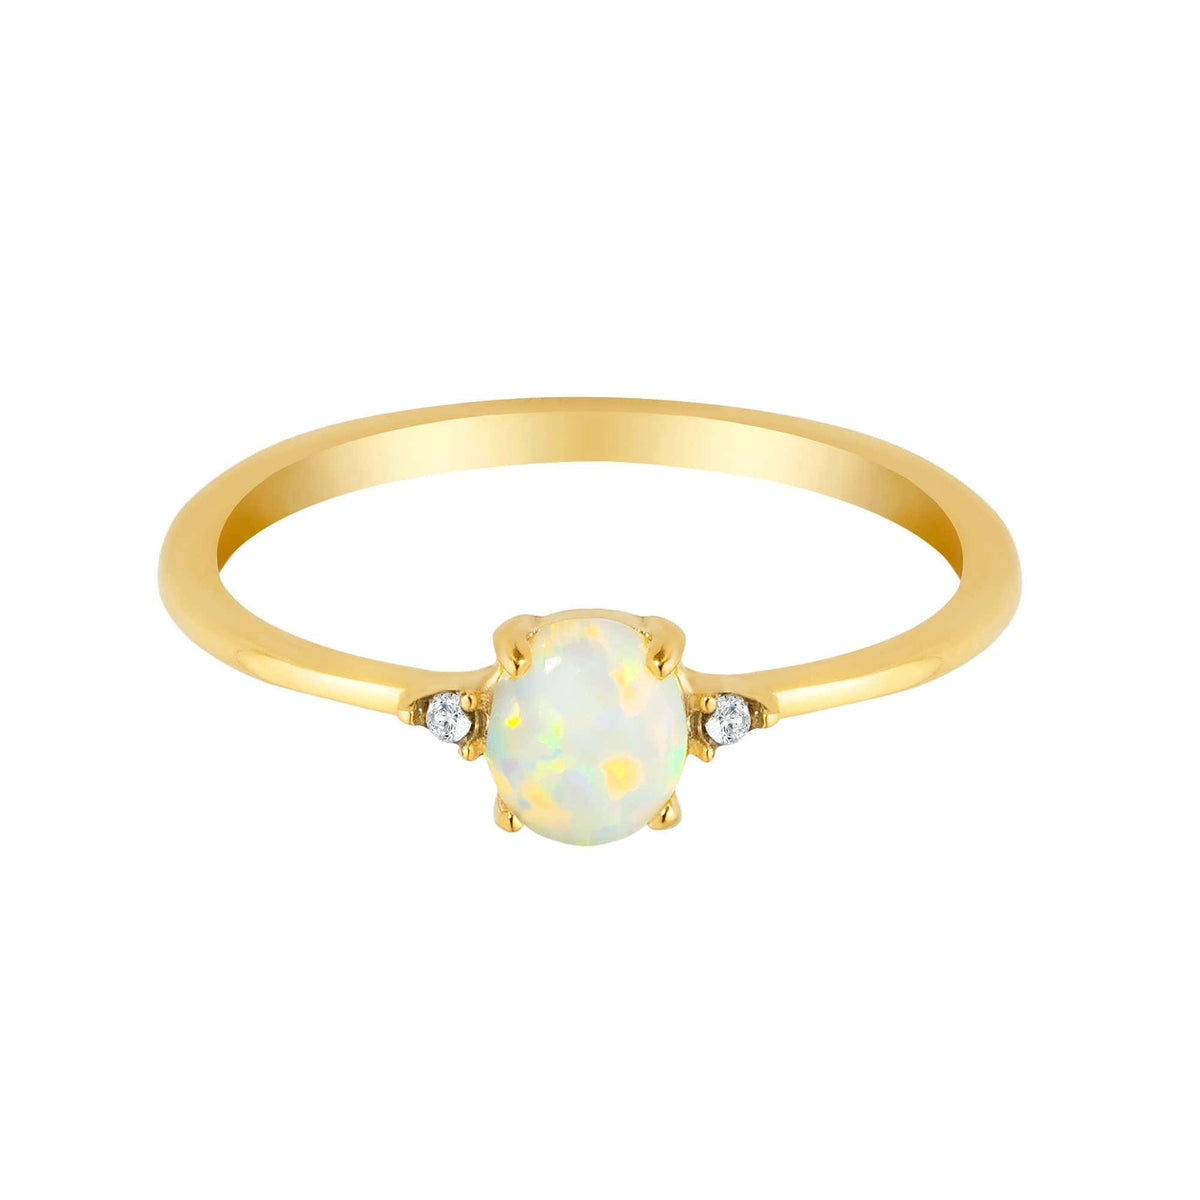 BohoMoon Stainless Steel December Opal Ring Gold / US 6 / UK L / EUR 51 (small)